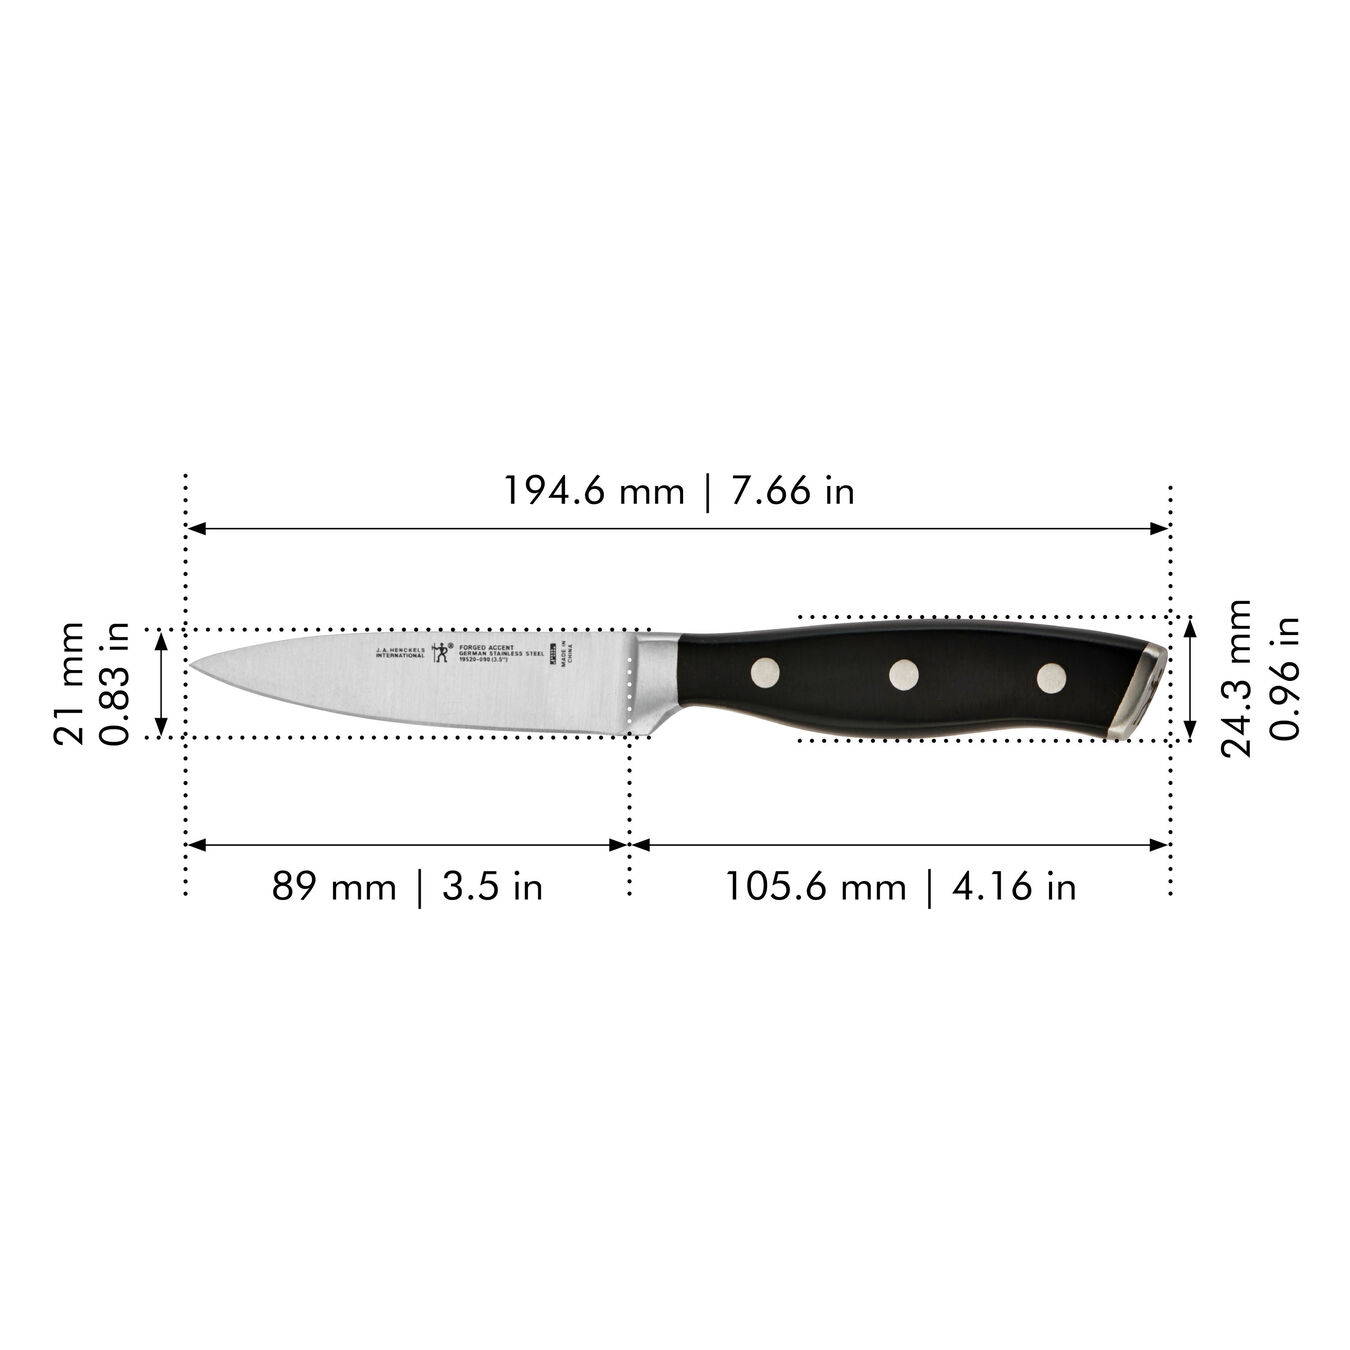 3.5 inch Paring knife,,large 2